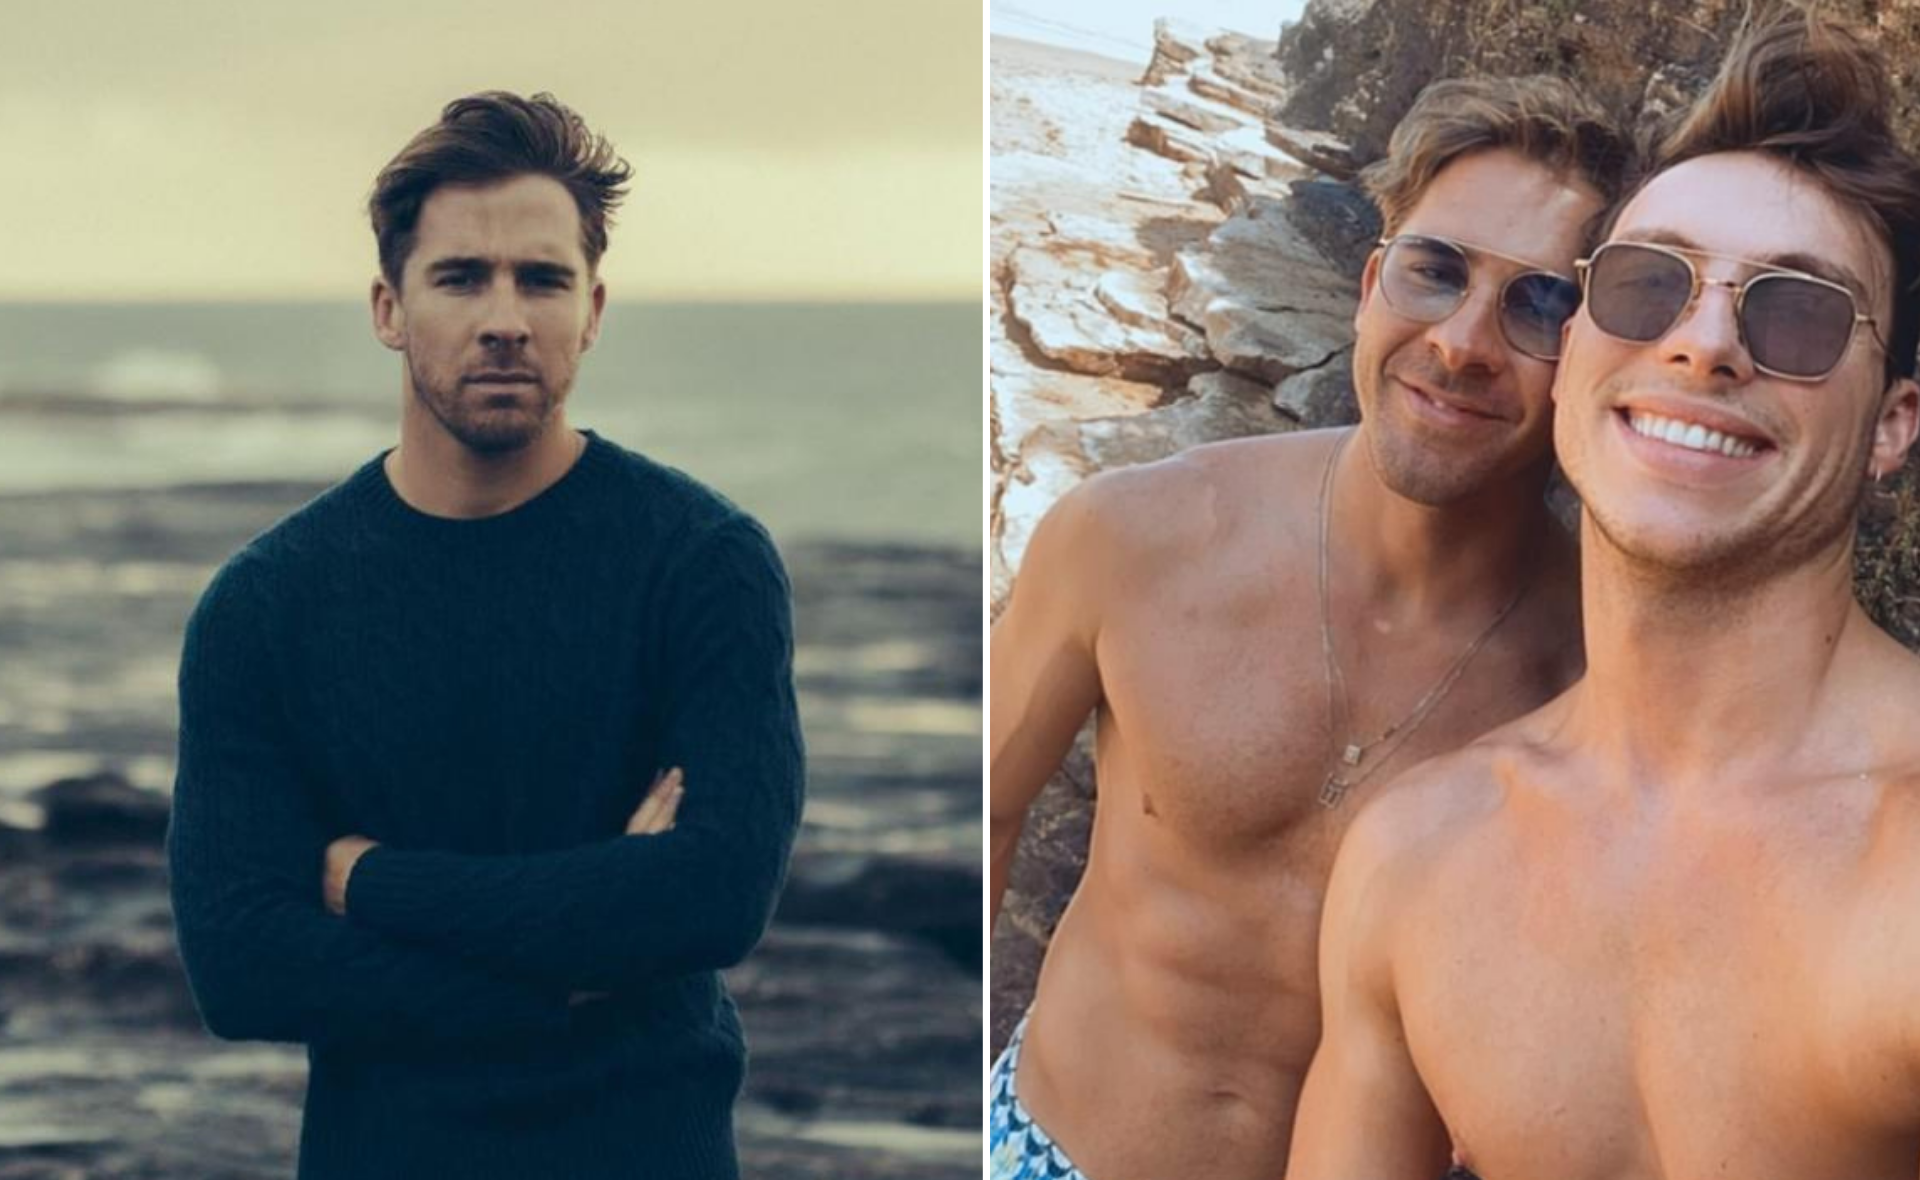 Hugh Sheridan reveals they are non-binary in a gorgeous shoot with fiancé Kurt Roberts